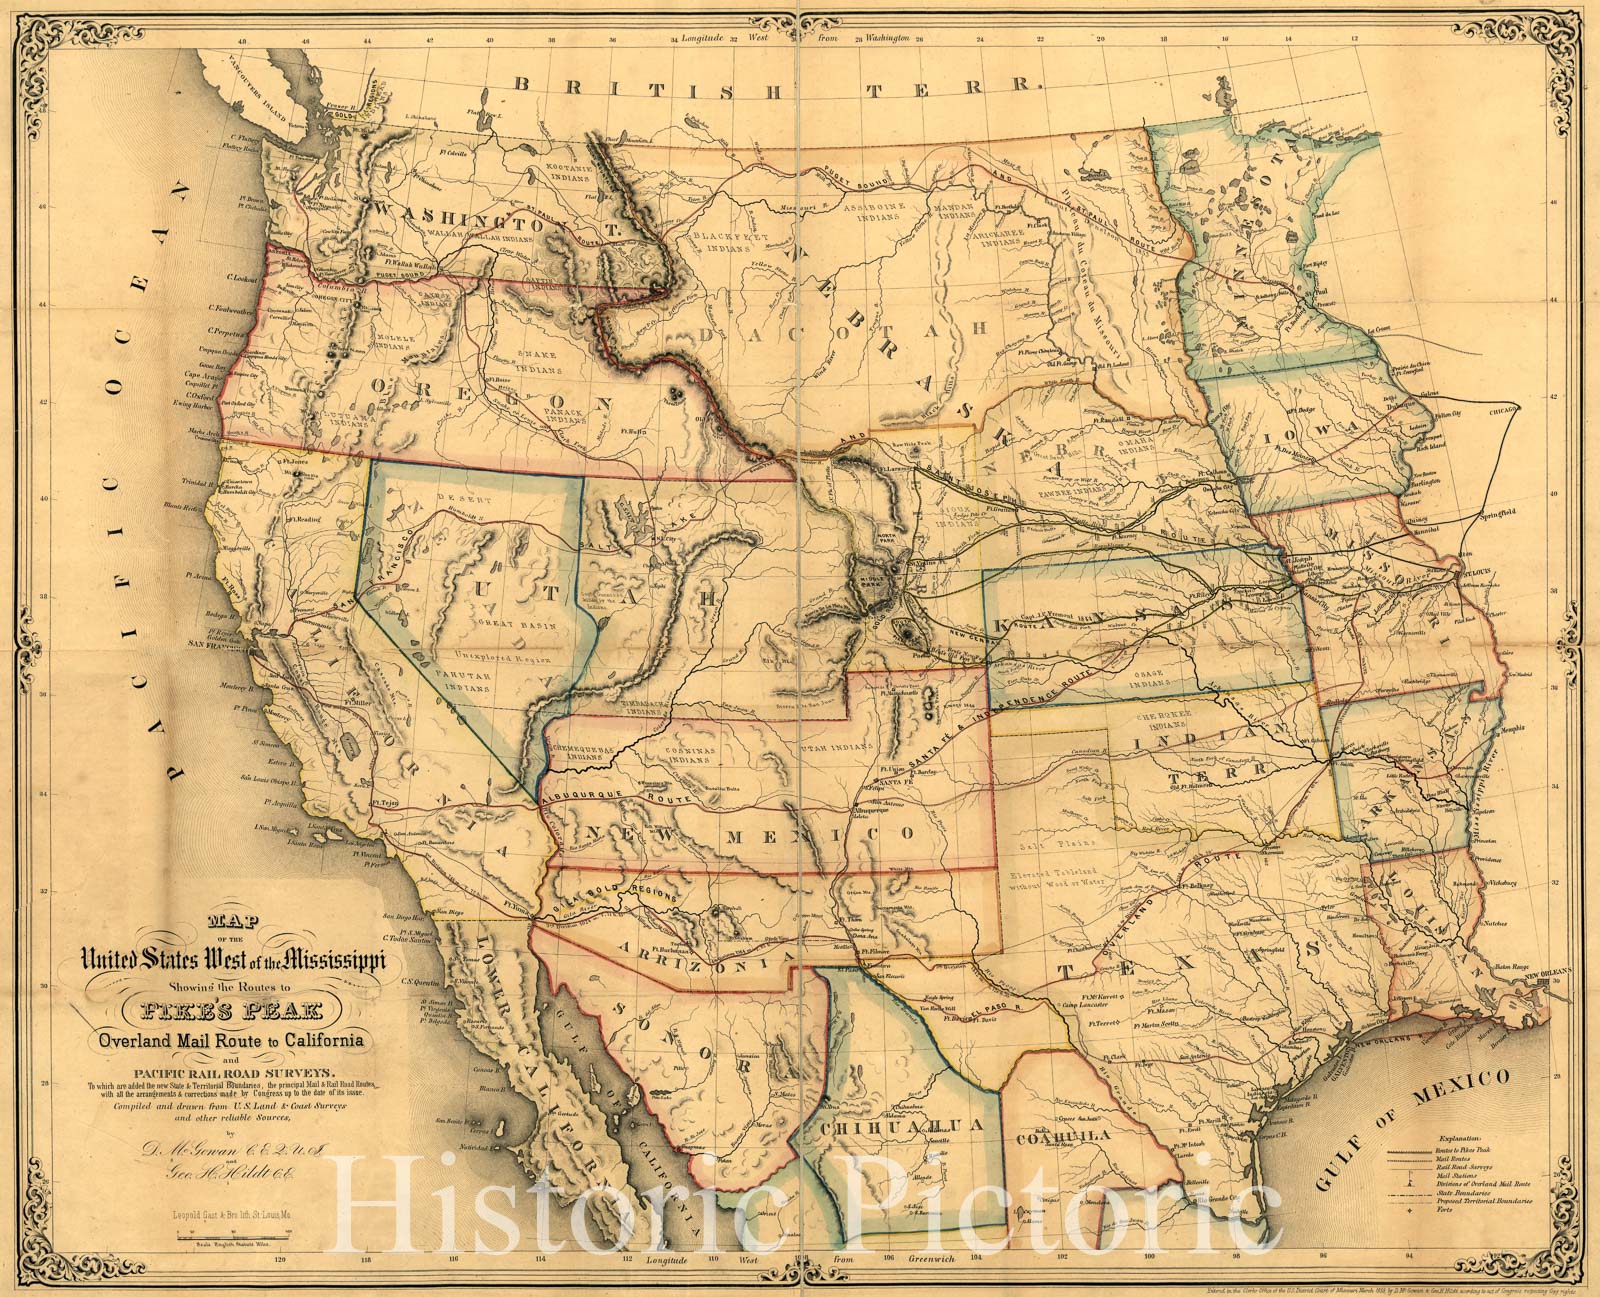 Historic 1859 Map - Map of The United States west of The Mississippi Showing The Routes to Pike's Peak, Overland Mail Route to California and Pacific Rail Road surveys.